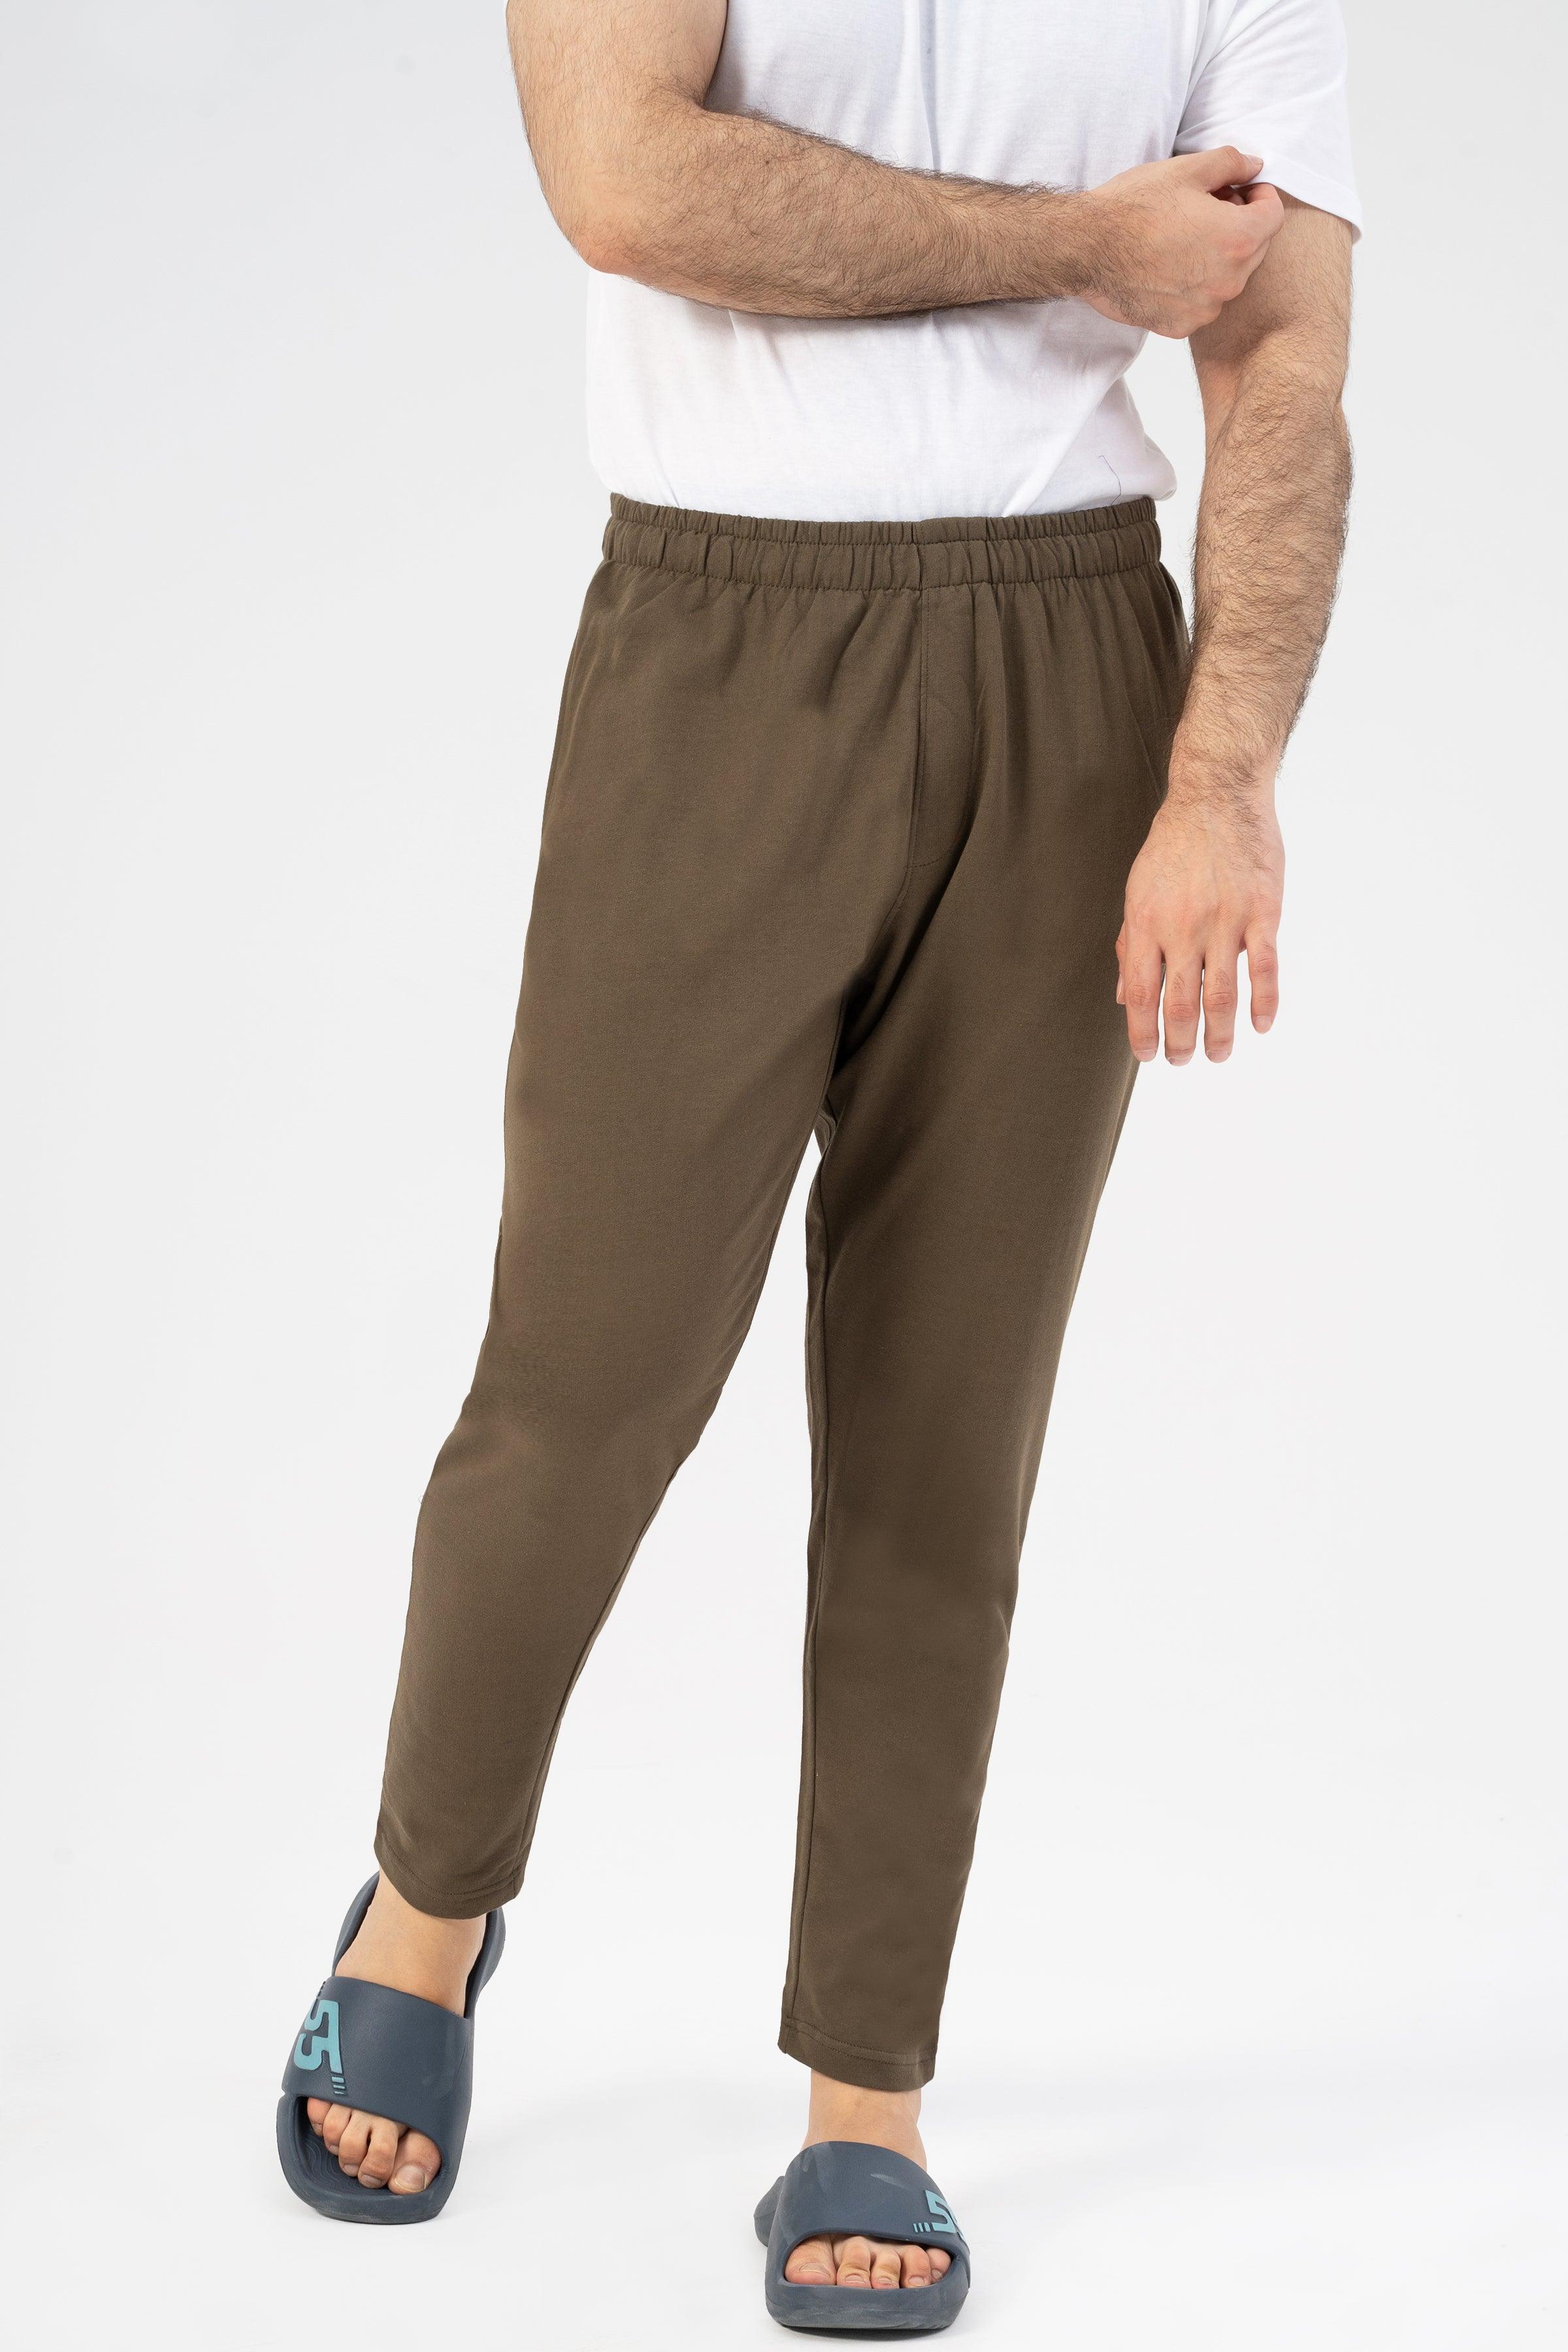 ULTIMATE COMFORT SLEEPWEAR PANT OLIVE at Charcoal Clothing